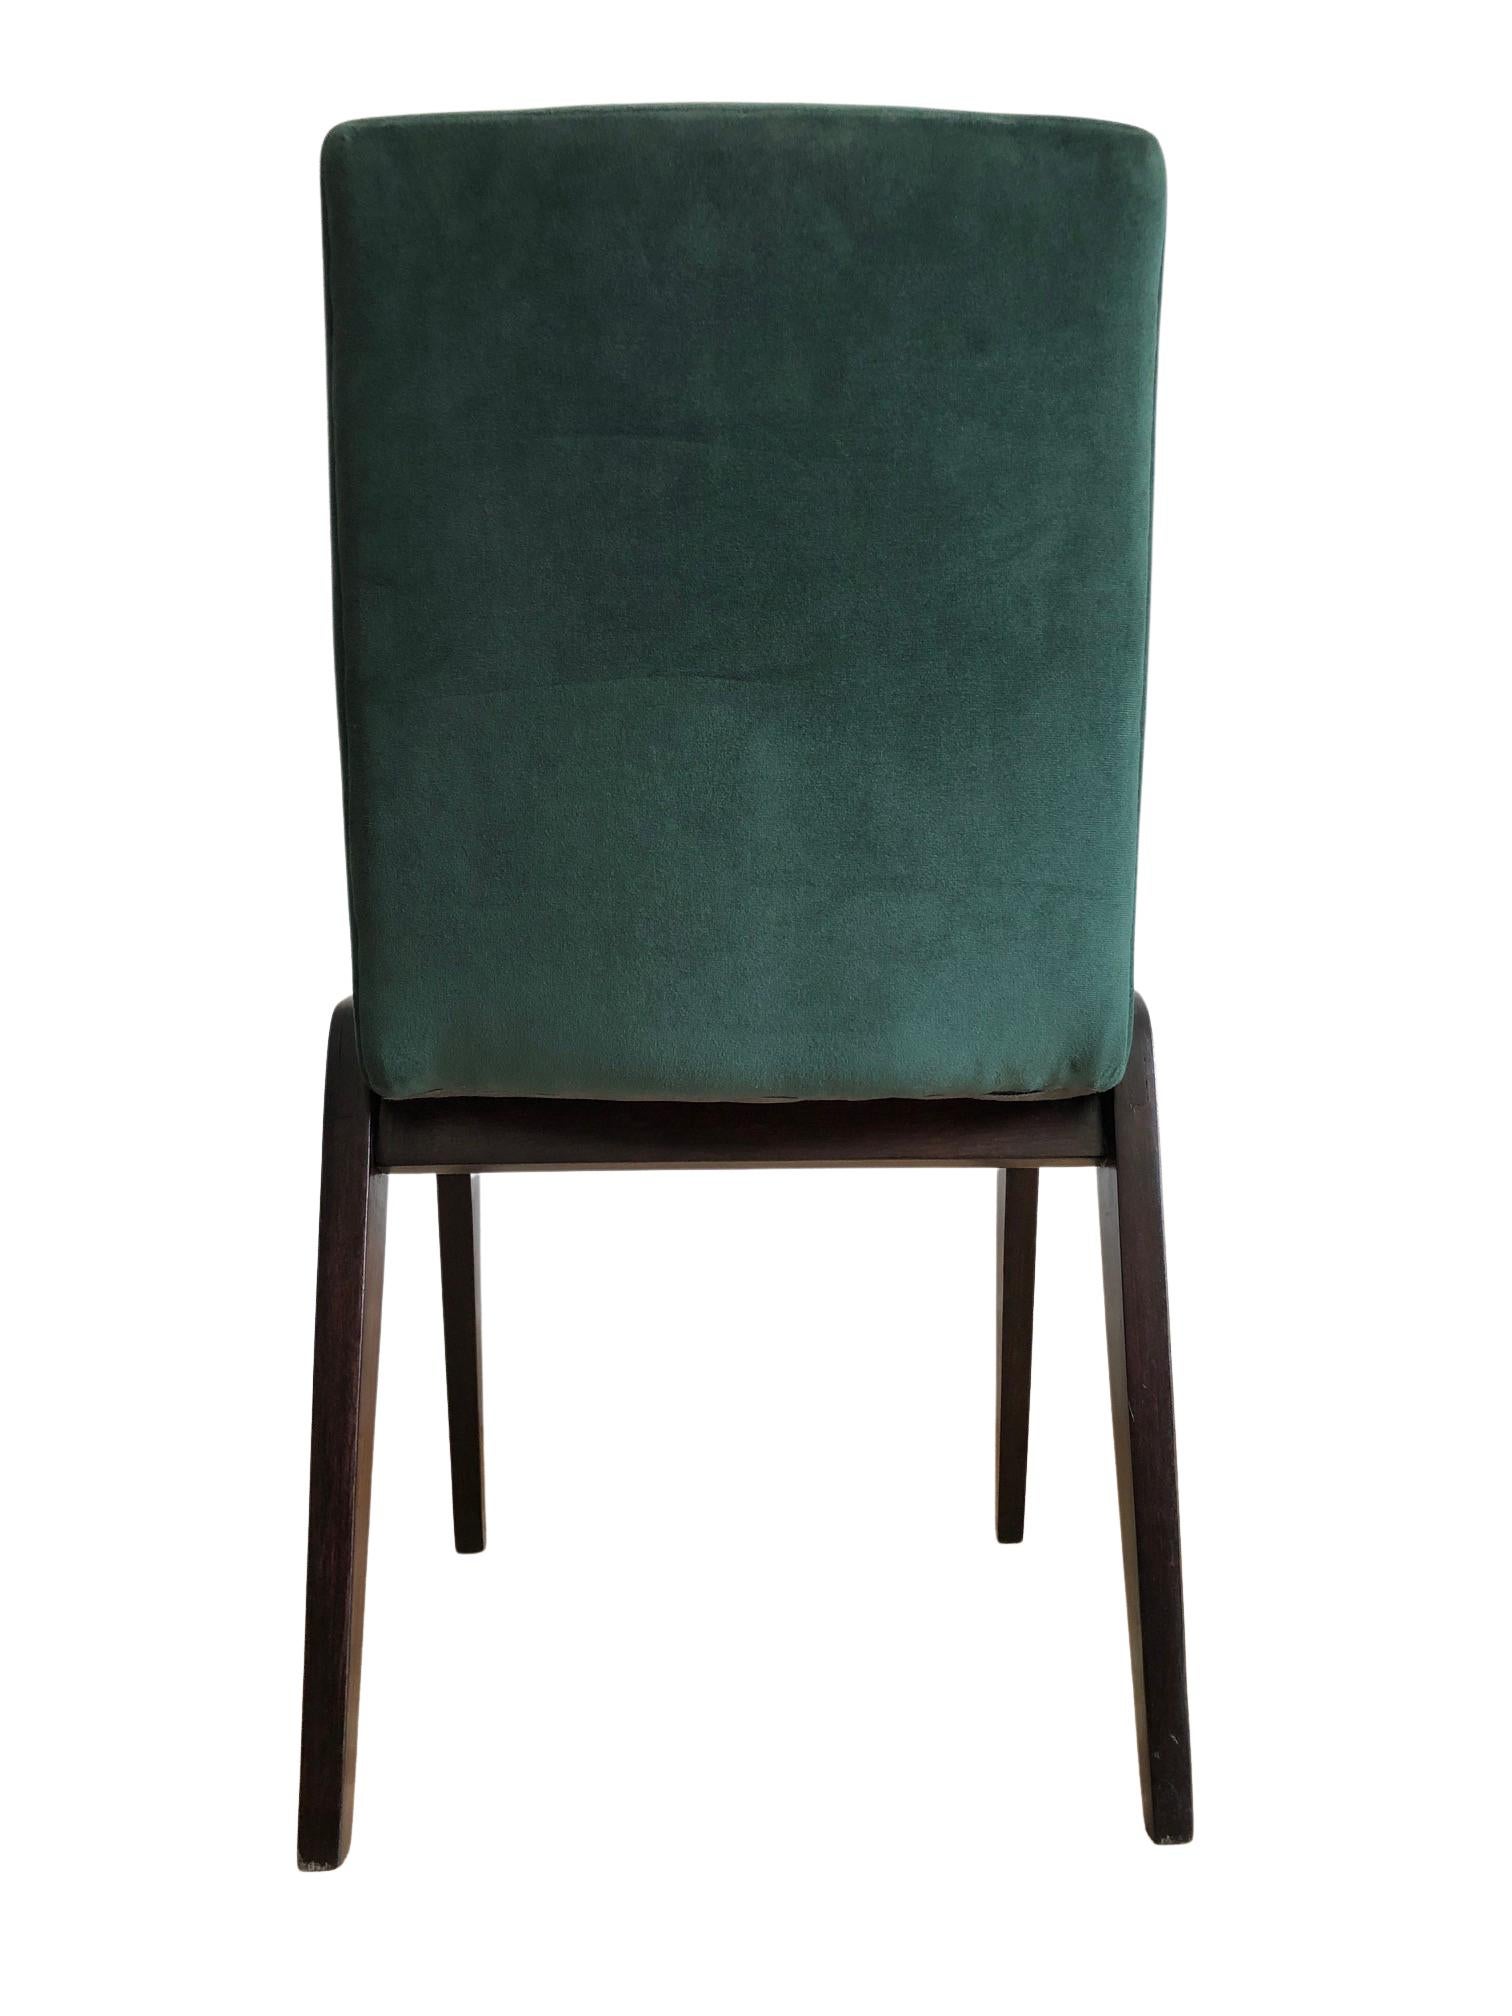 Hand-Crafted Mid-Century Chair by Chierowski, in Green Velvet, 1960s For Sale